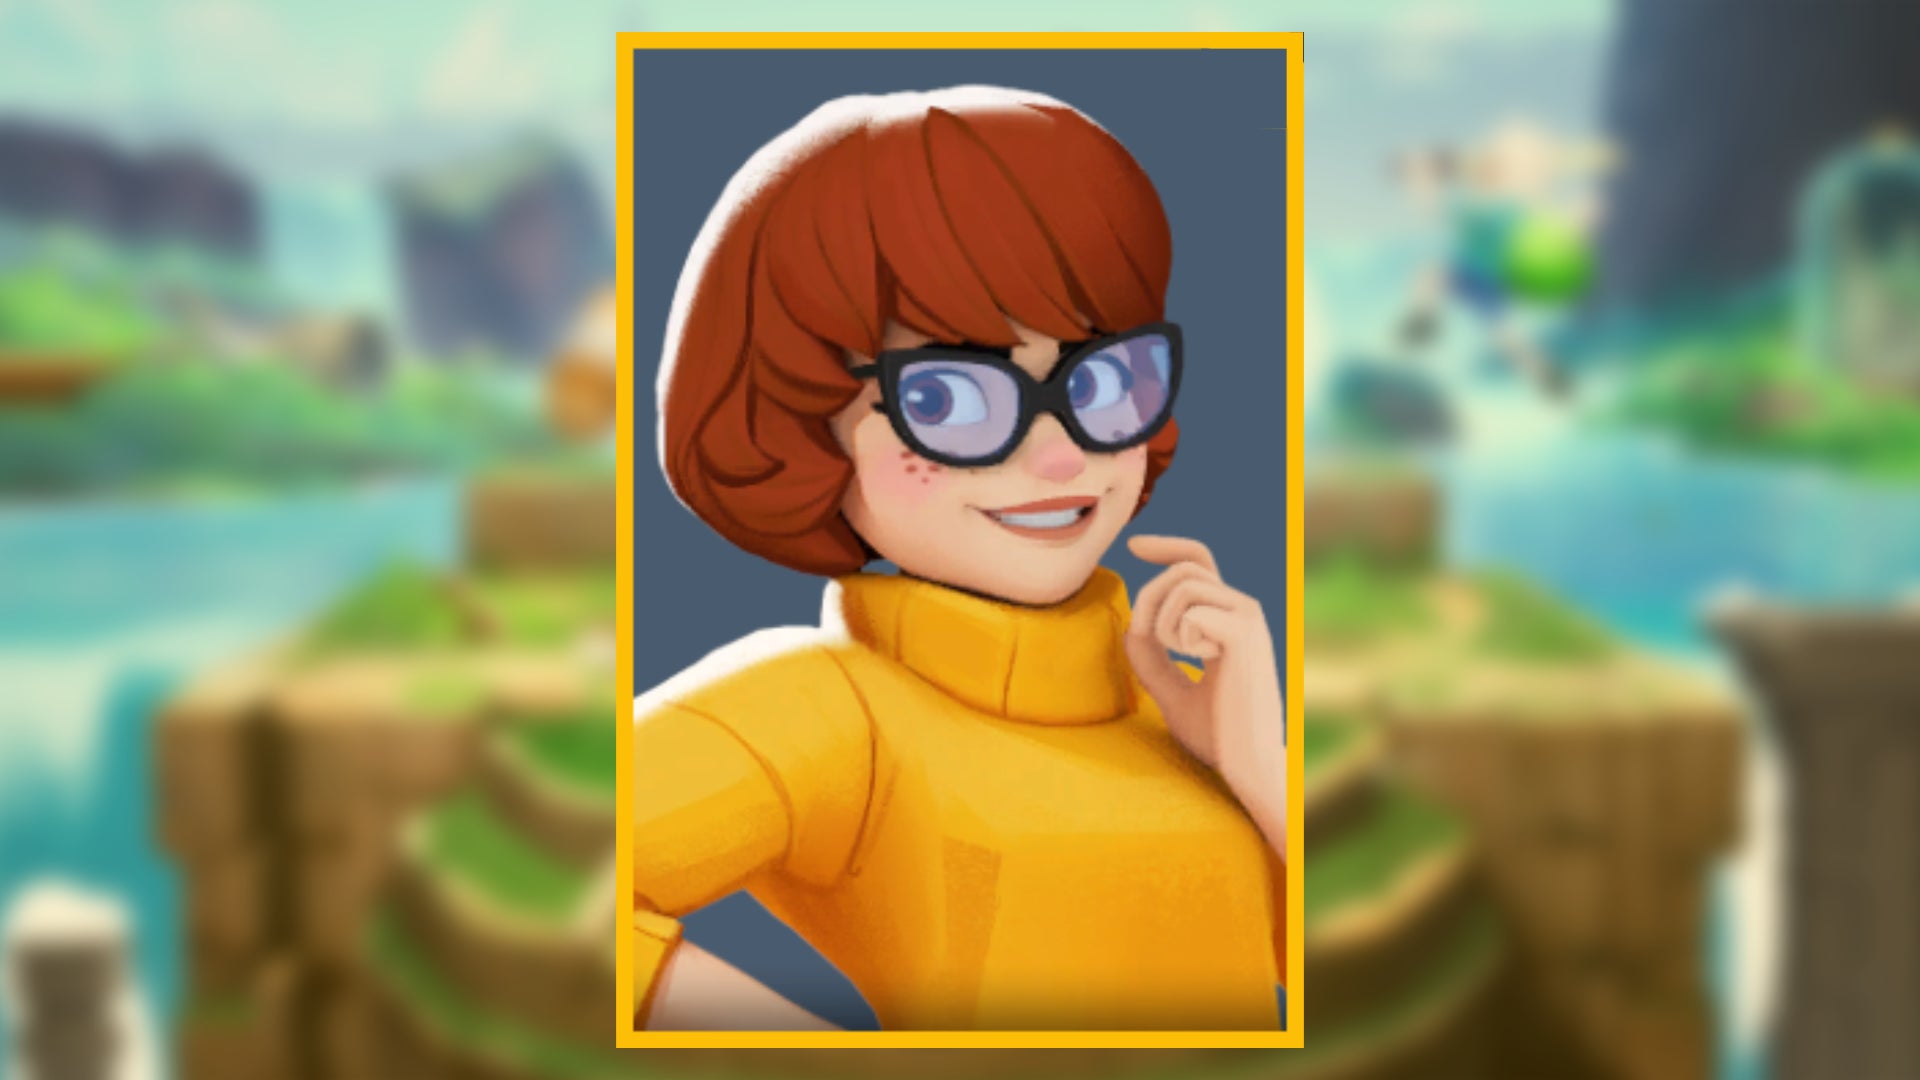 The character portrait of Velma, a playable character in MultiVersus, against a blurred background.